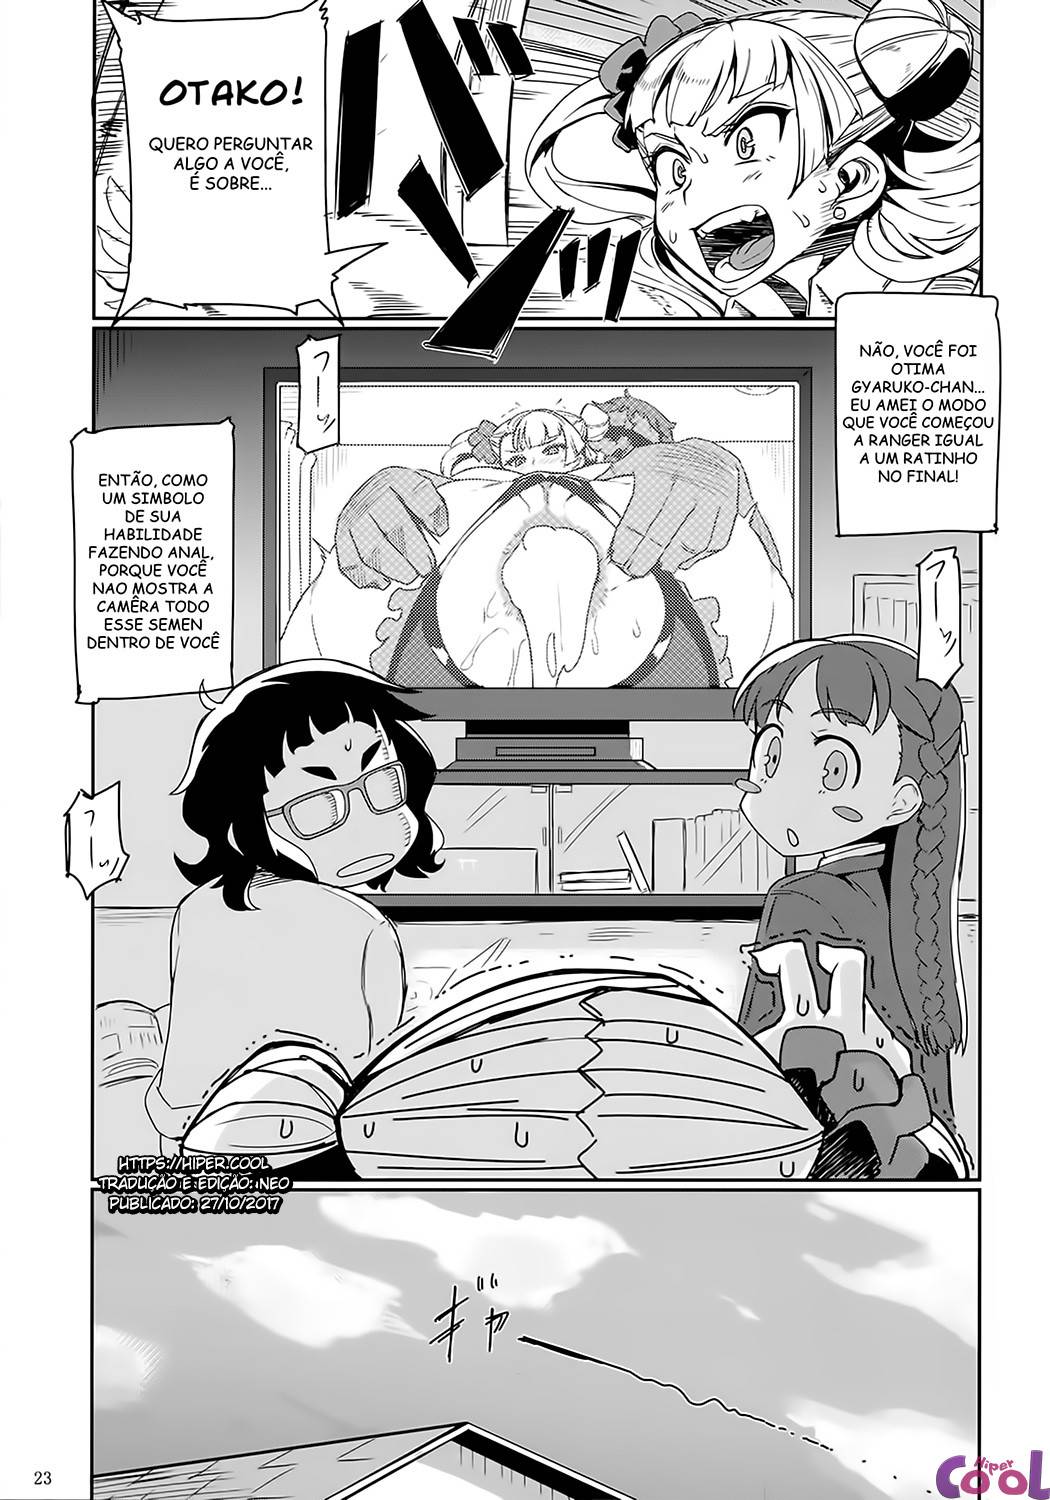 galko-ah--chapter-01-page-23.jpg